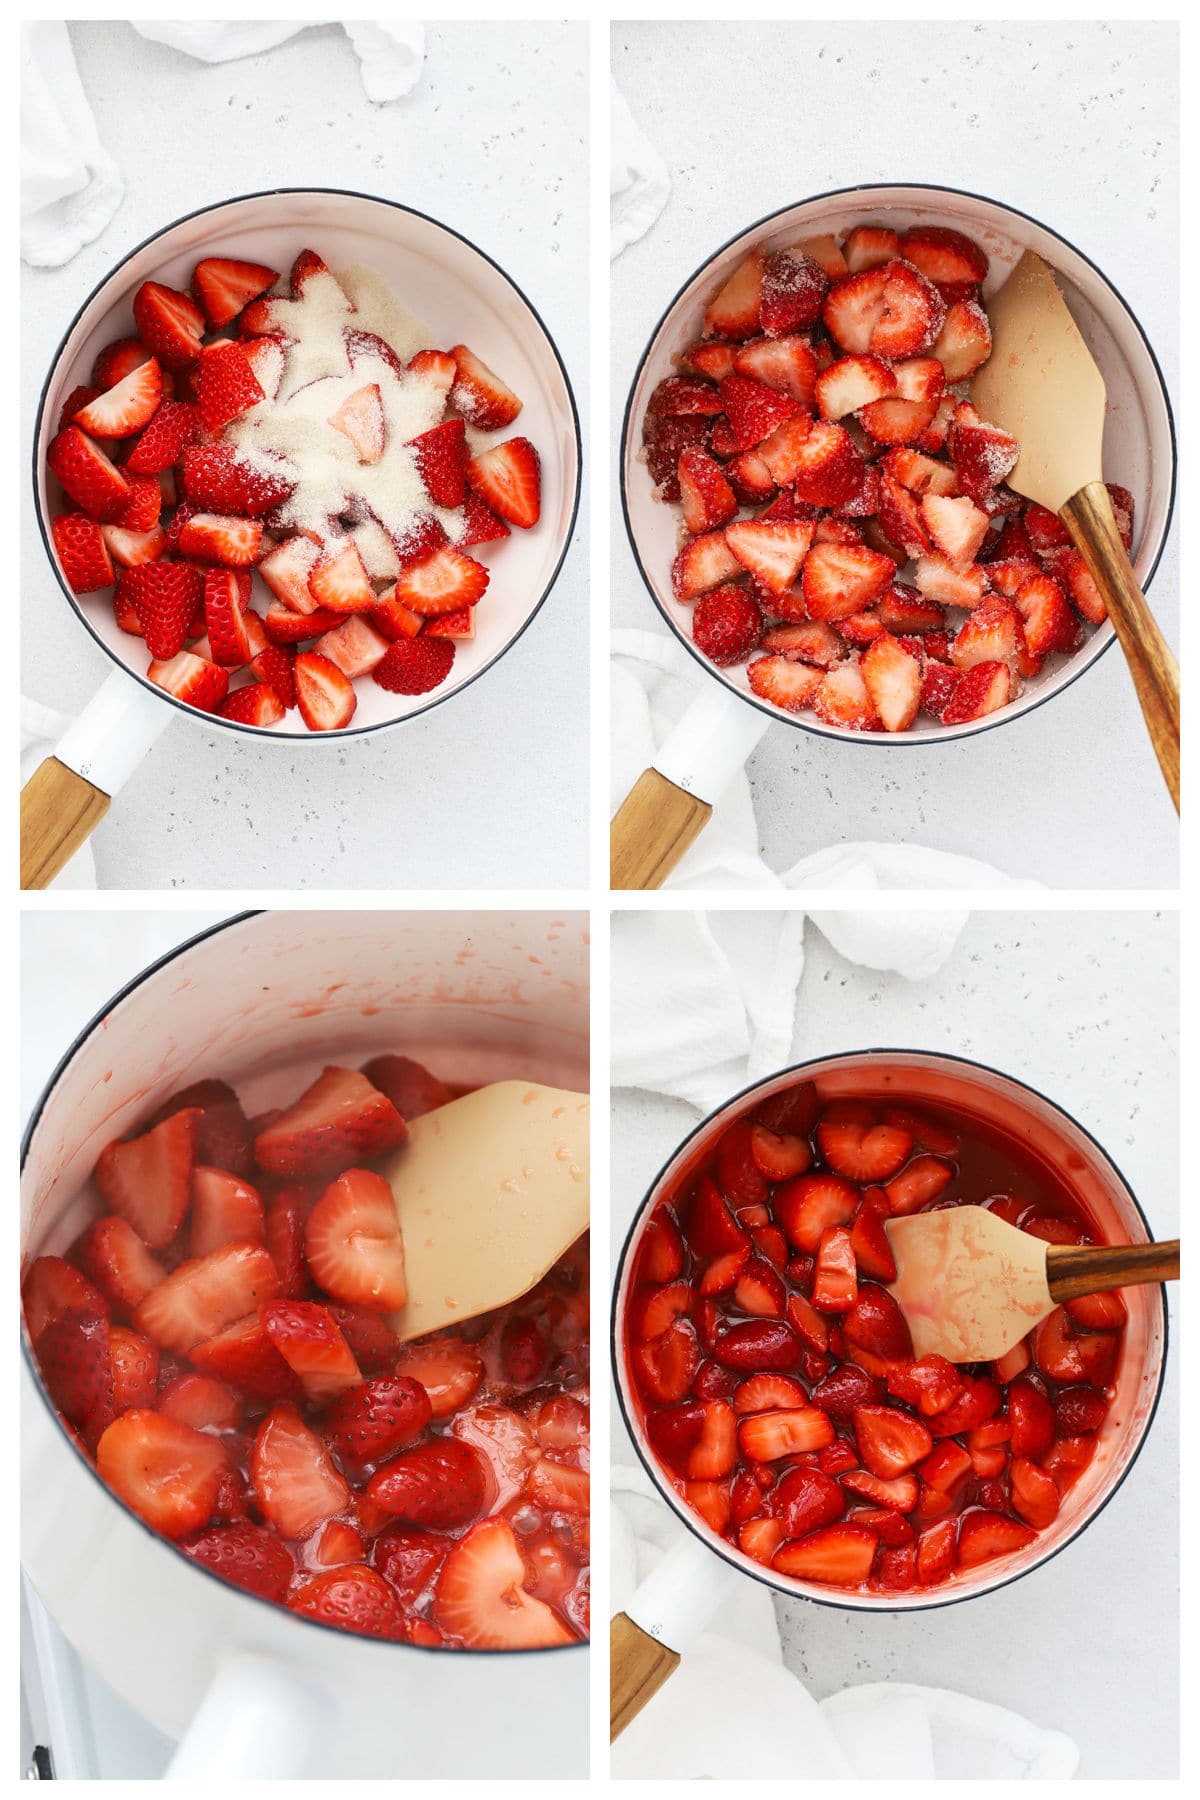 Making strawberry topping step by step